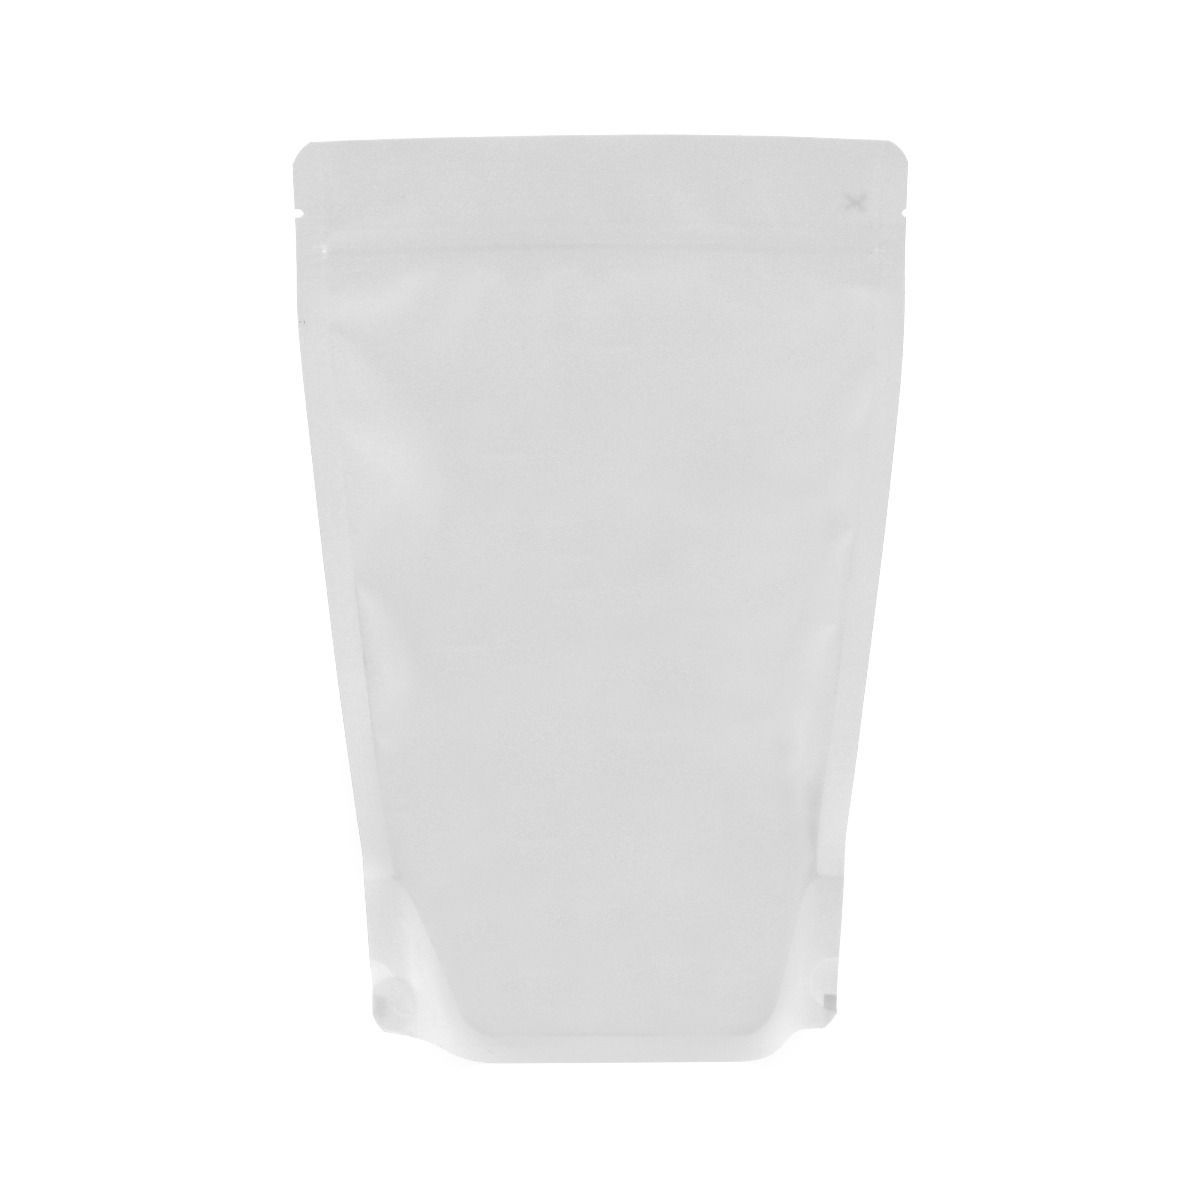 Stand-up pouch - matt white (100% recyclable)